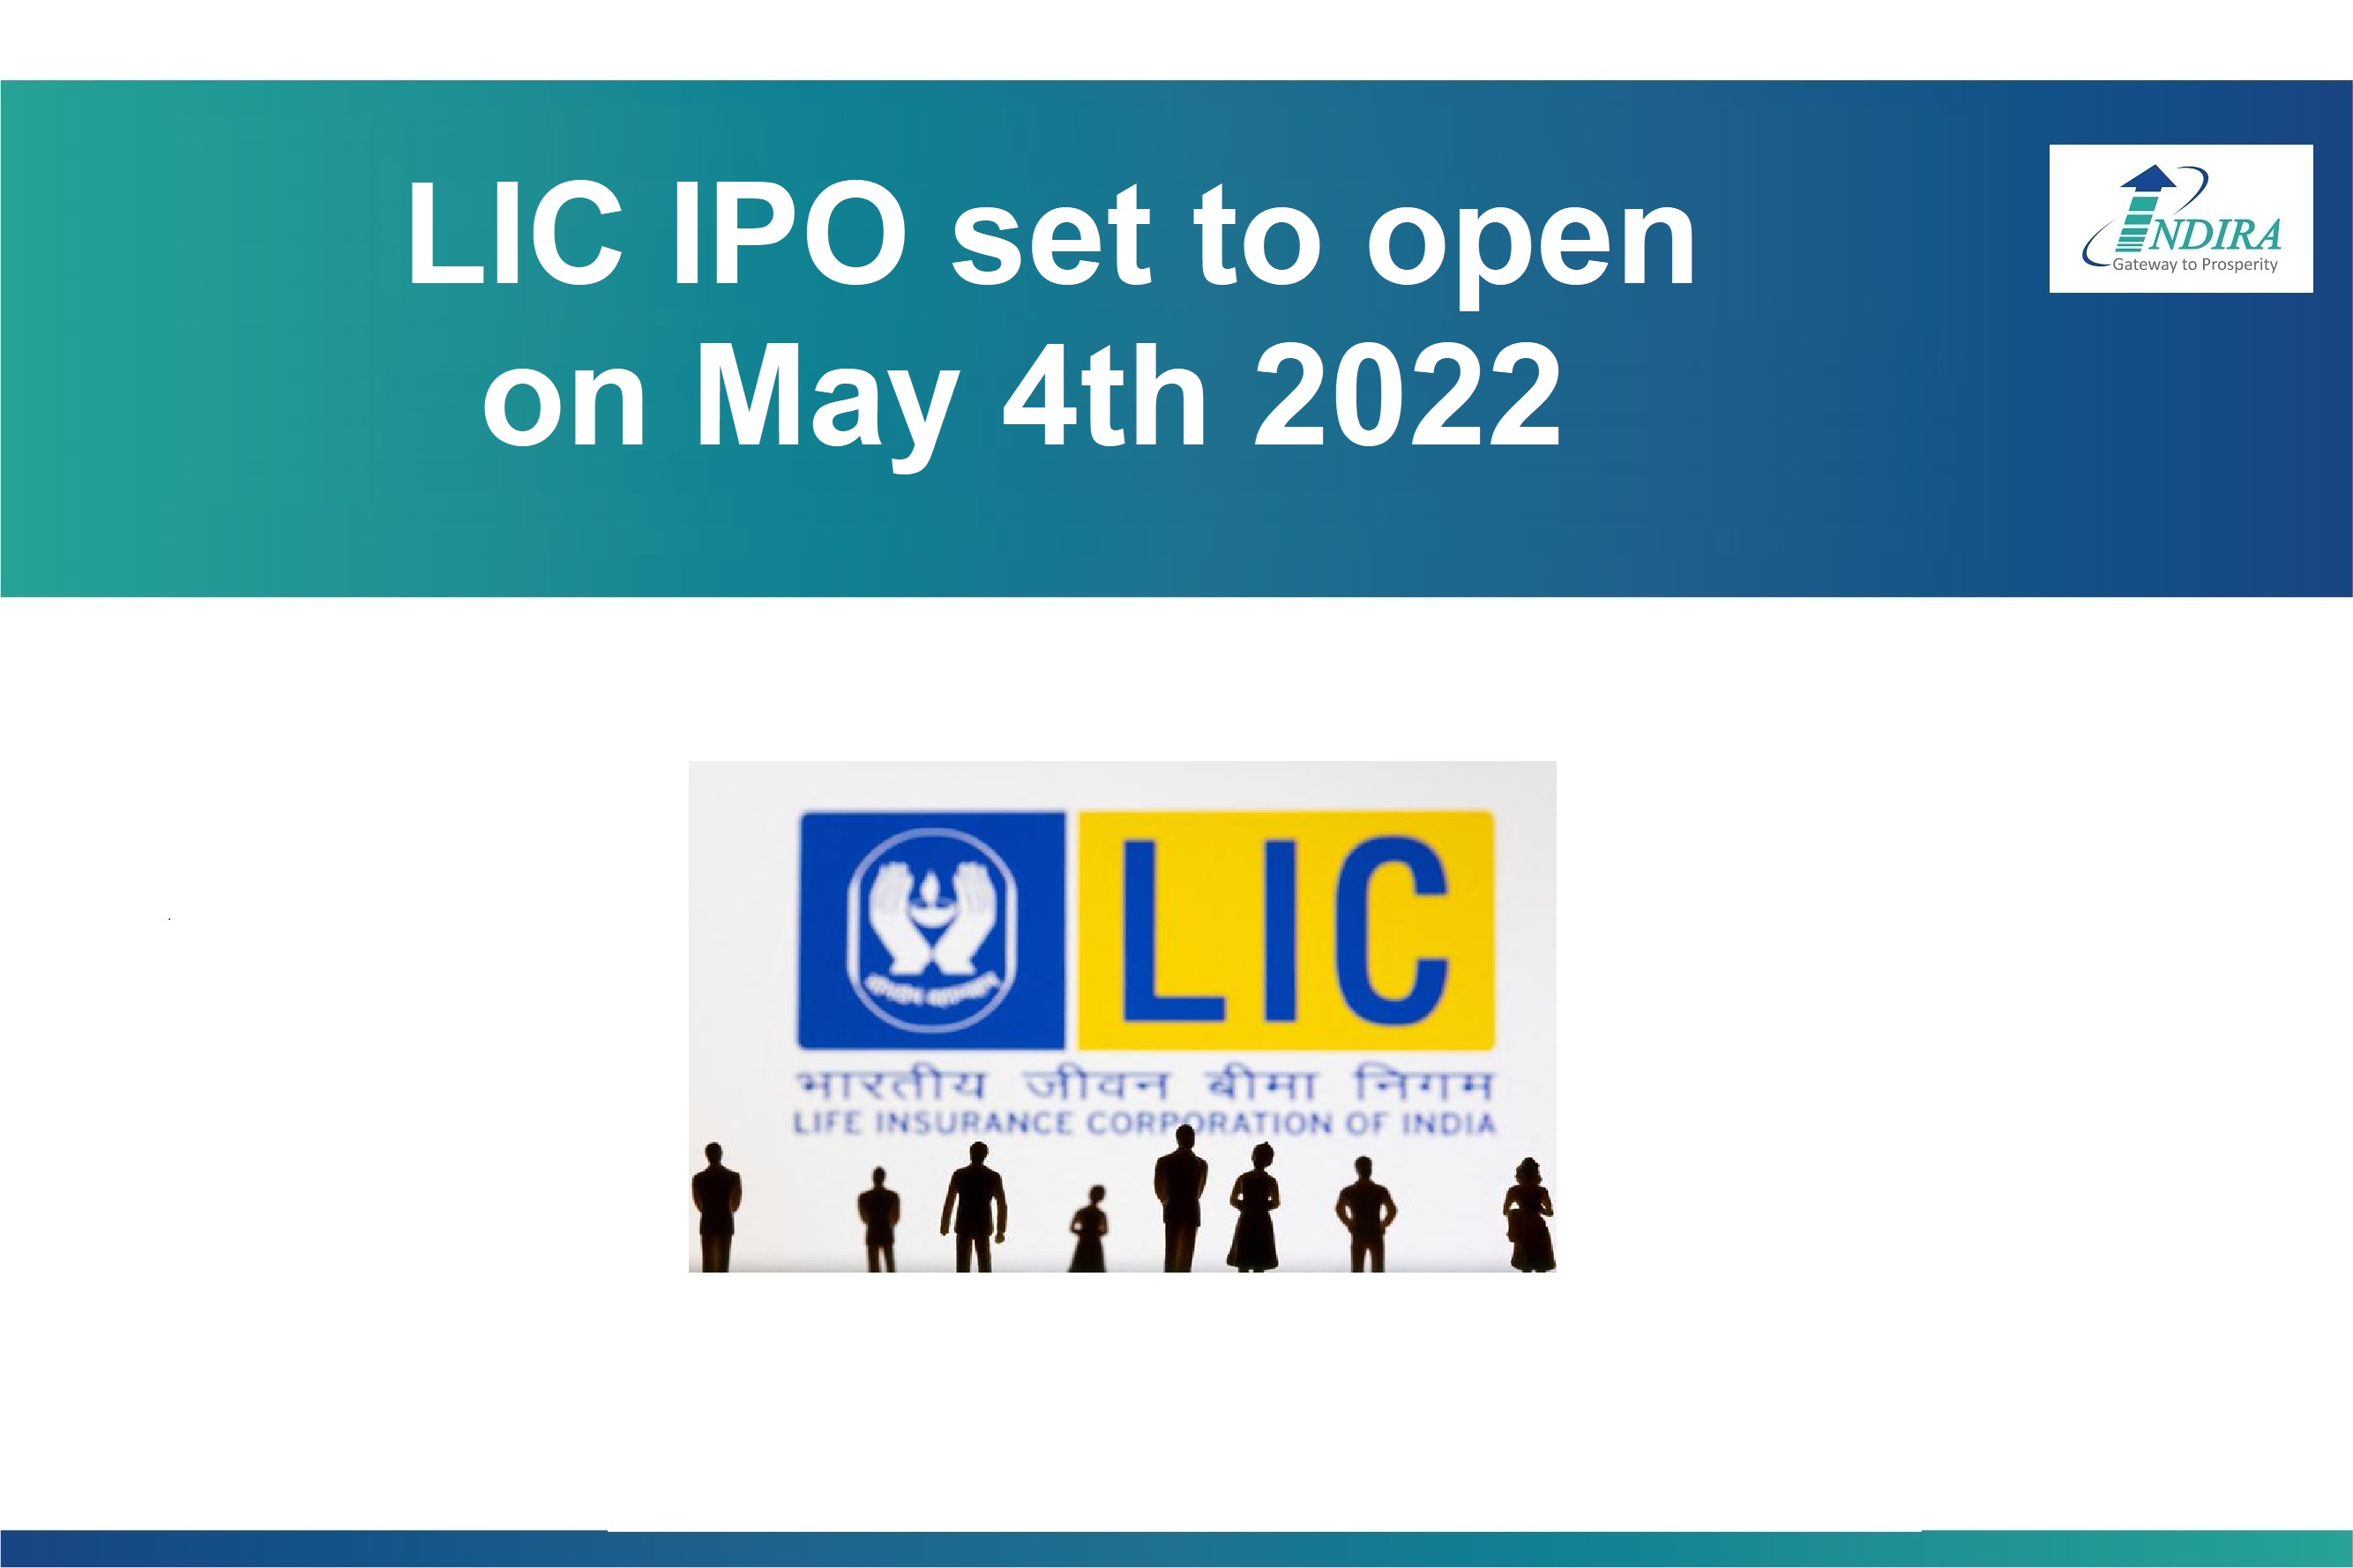 LIC IPO to open on May 4th 2022